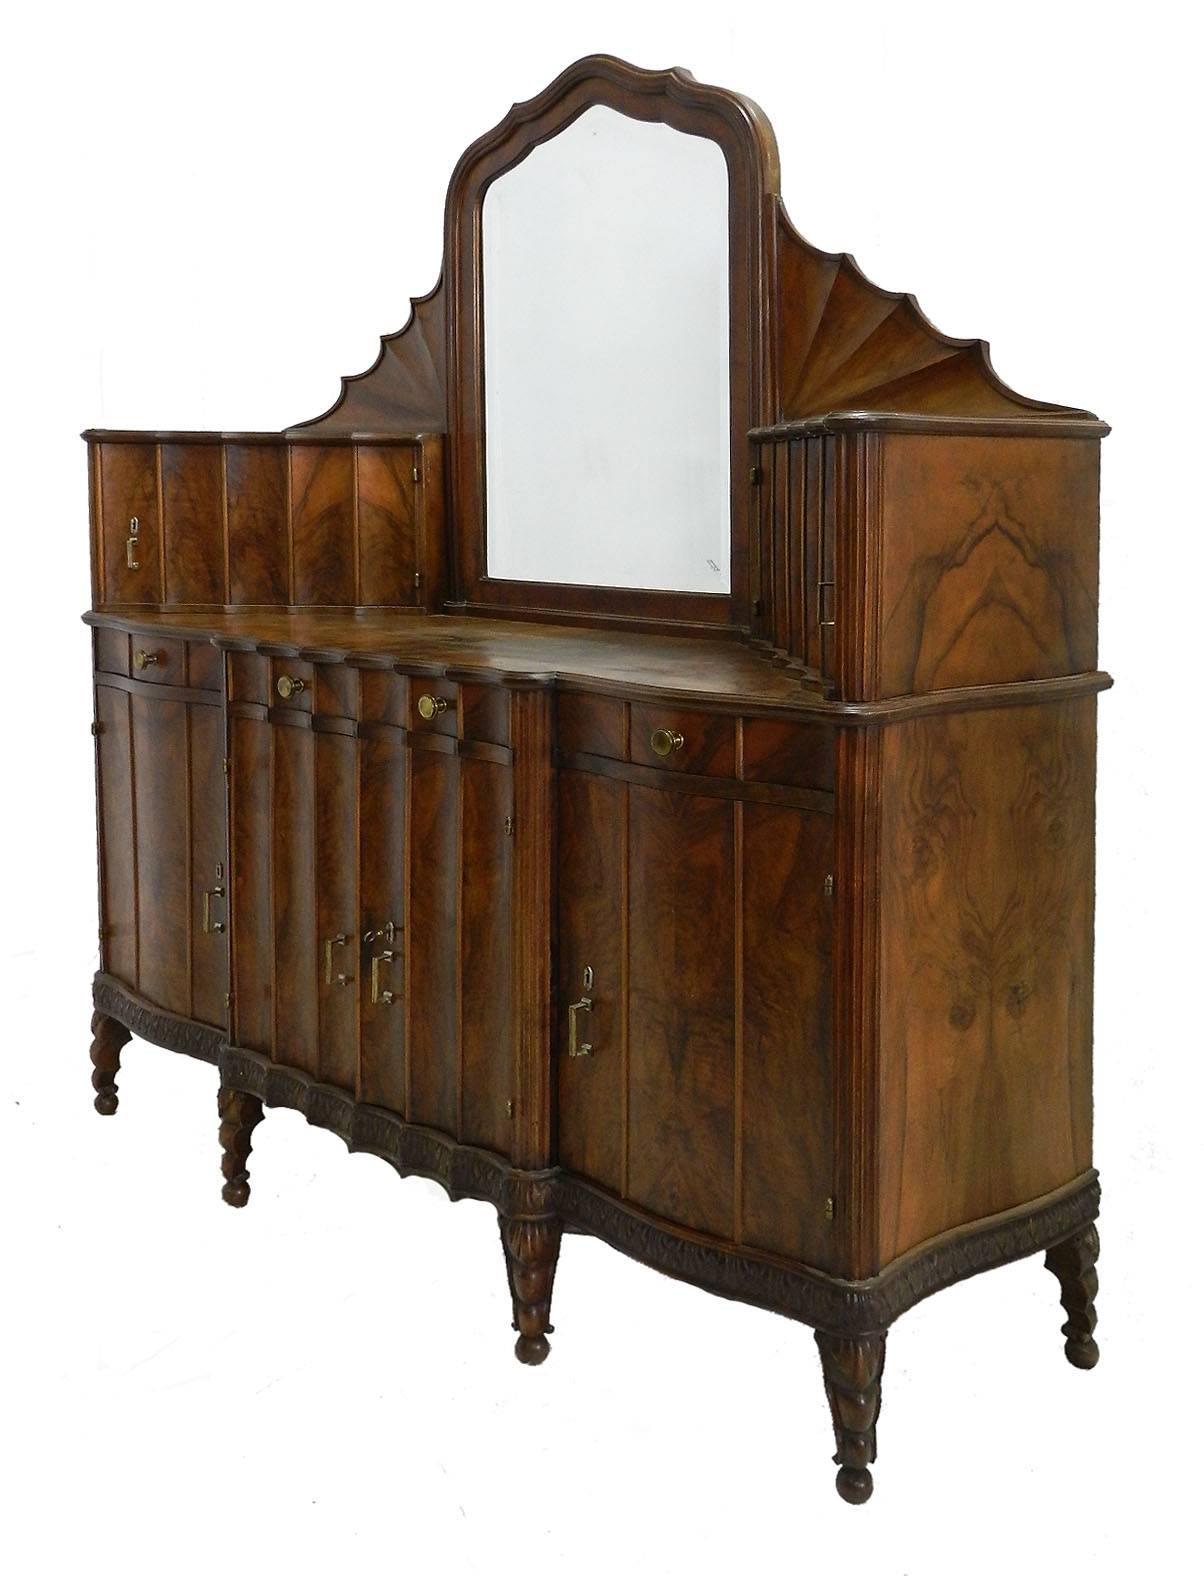 Credenza sideboard, circa 1910 Art Nouveau Art Deco one-of-a-kind Buffet
Original bevelled mirror
Figured burr walnut
Scalloped edges
Carved dark walnut
With key
Italian inspiration from antique grotto shell furniture and reminiscent of early 20th